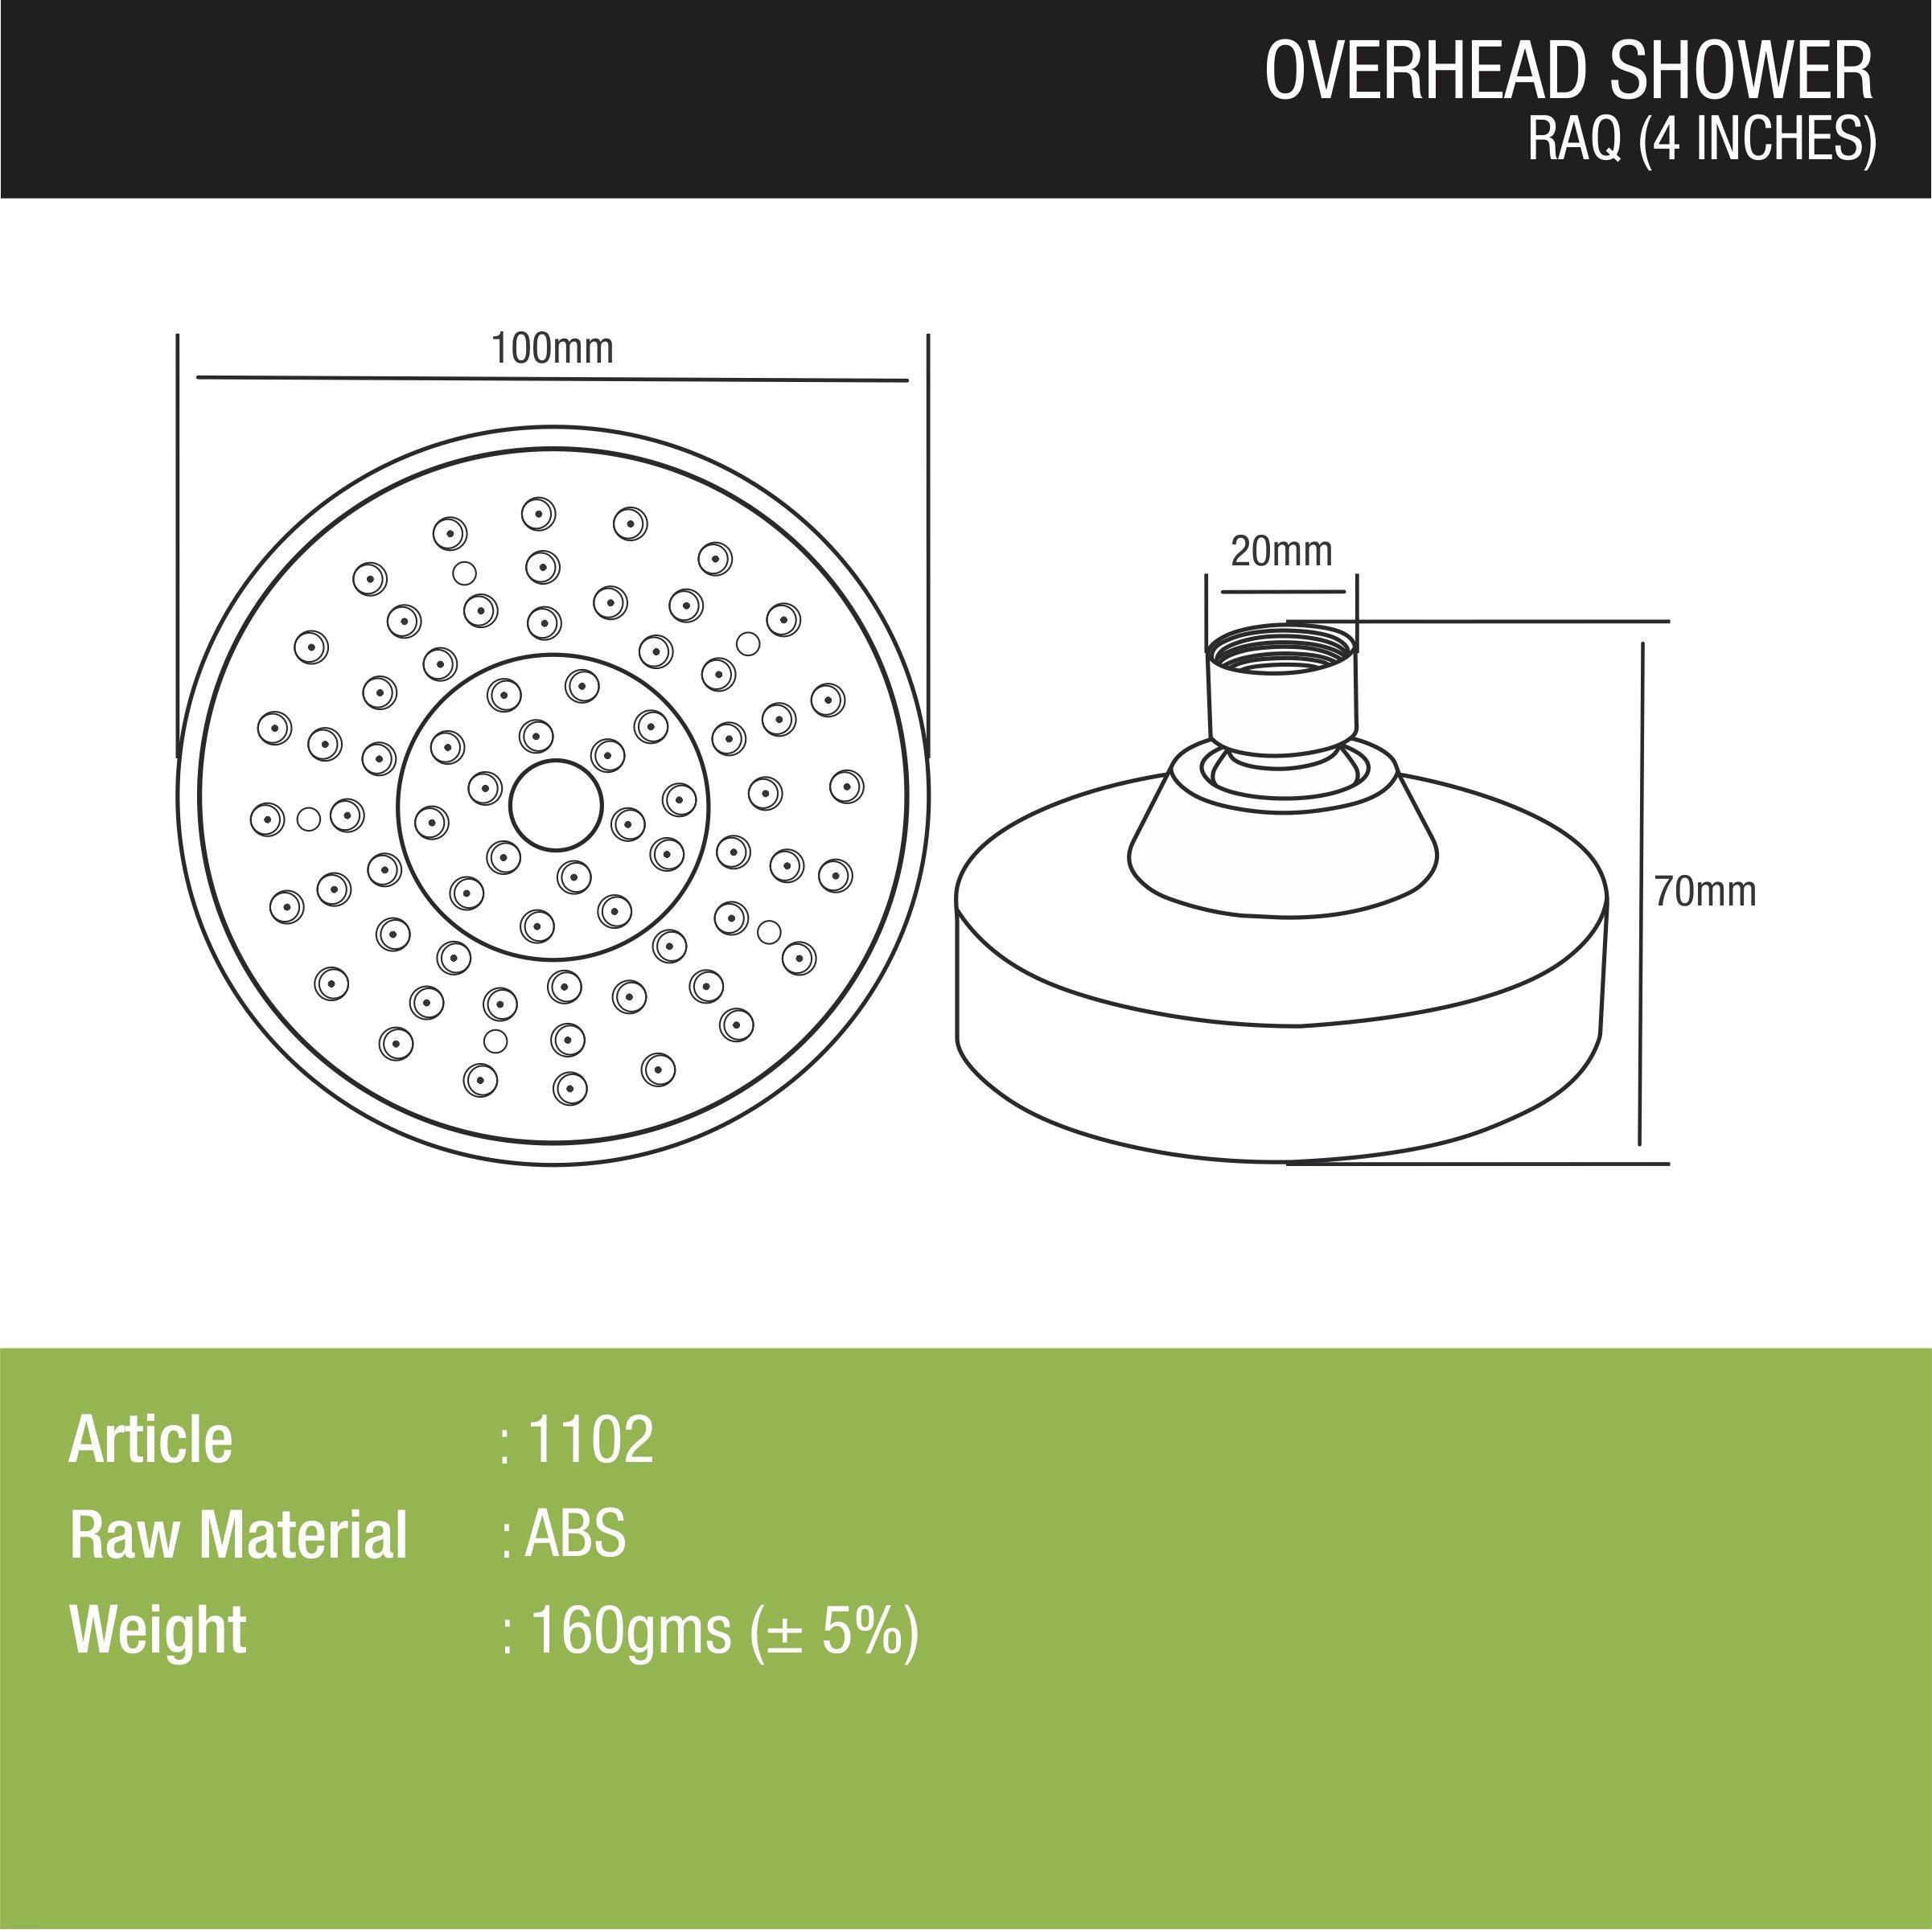 Raq Overhead Shower (4 Inches) dimensions and sizes